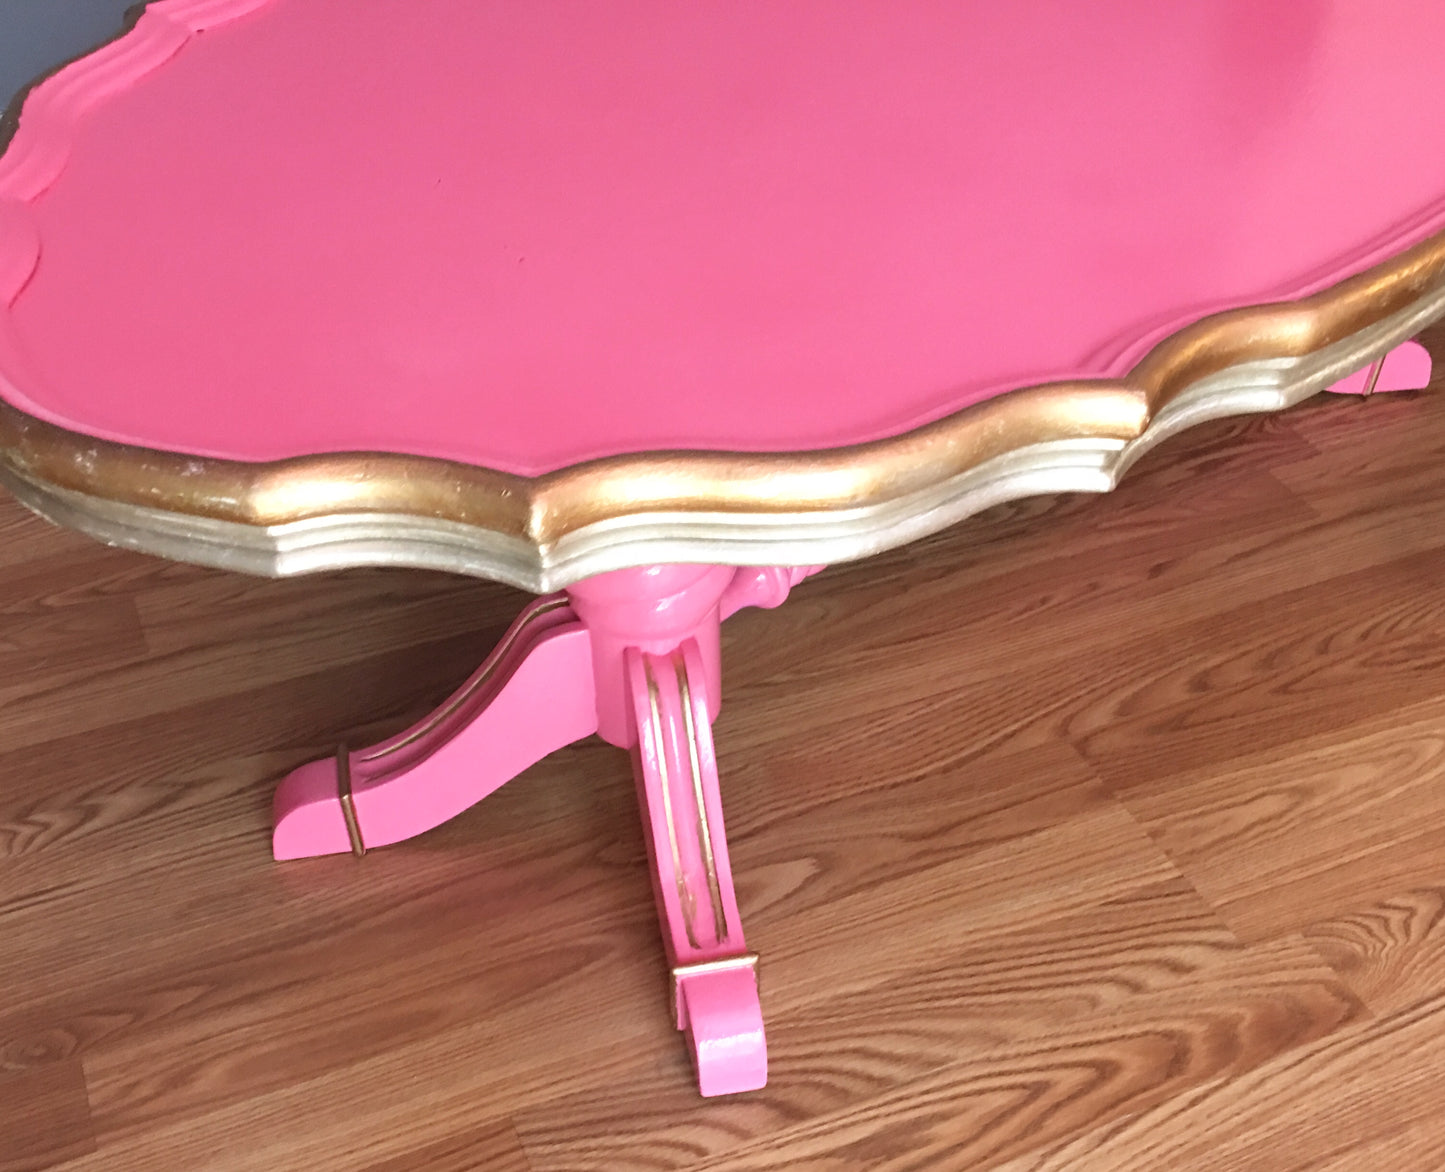 [SOLD] Deco Glam Hot Pink Lacquer Coffee Table